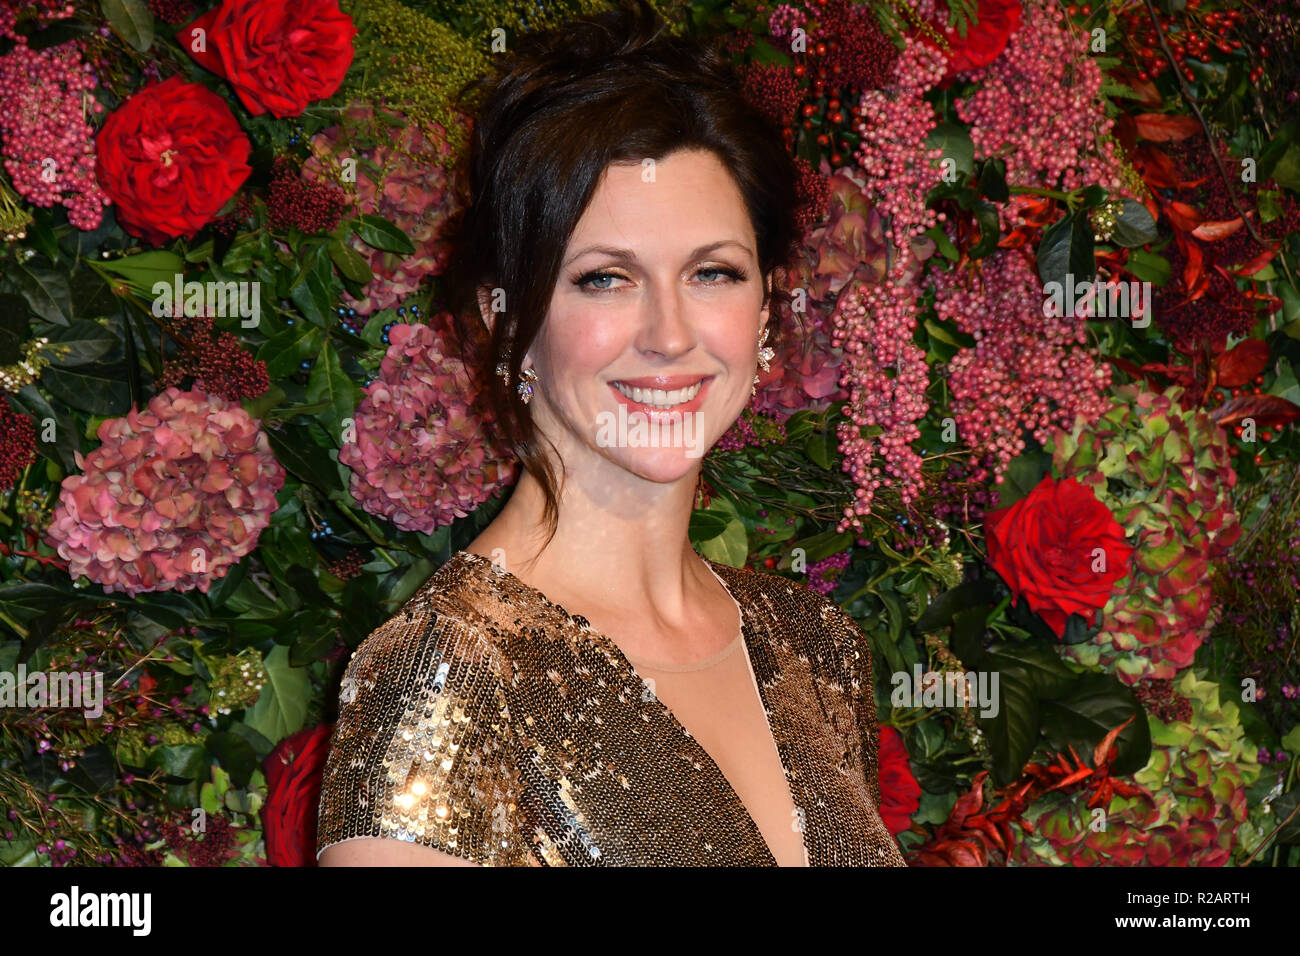 London, UK. 18th November 2018. Margo Stilley attends Evening Standard Theatre Awards at Theatre Royal, on 18 November 2018, London, UK. Credit: Picture Capital/Alamy Live News Stock Photo